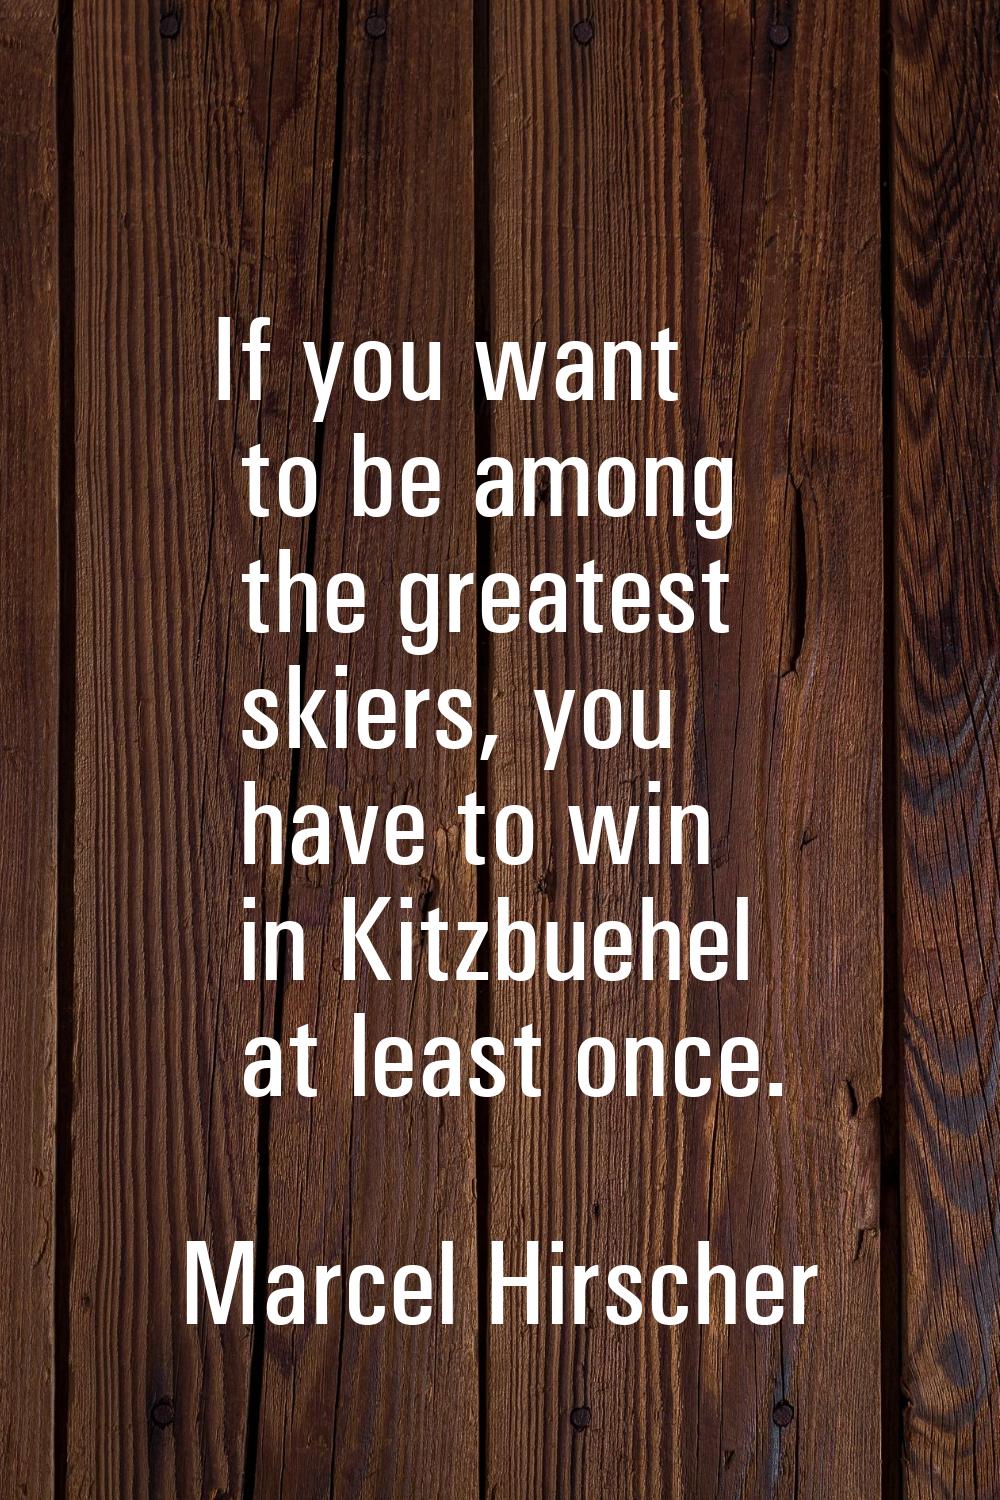 If you want to be among the greatest skiers, you have to win in Kitzbuehel at least once.